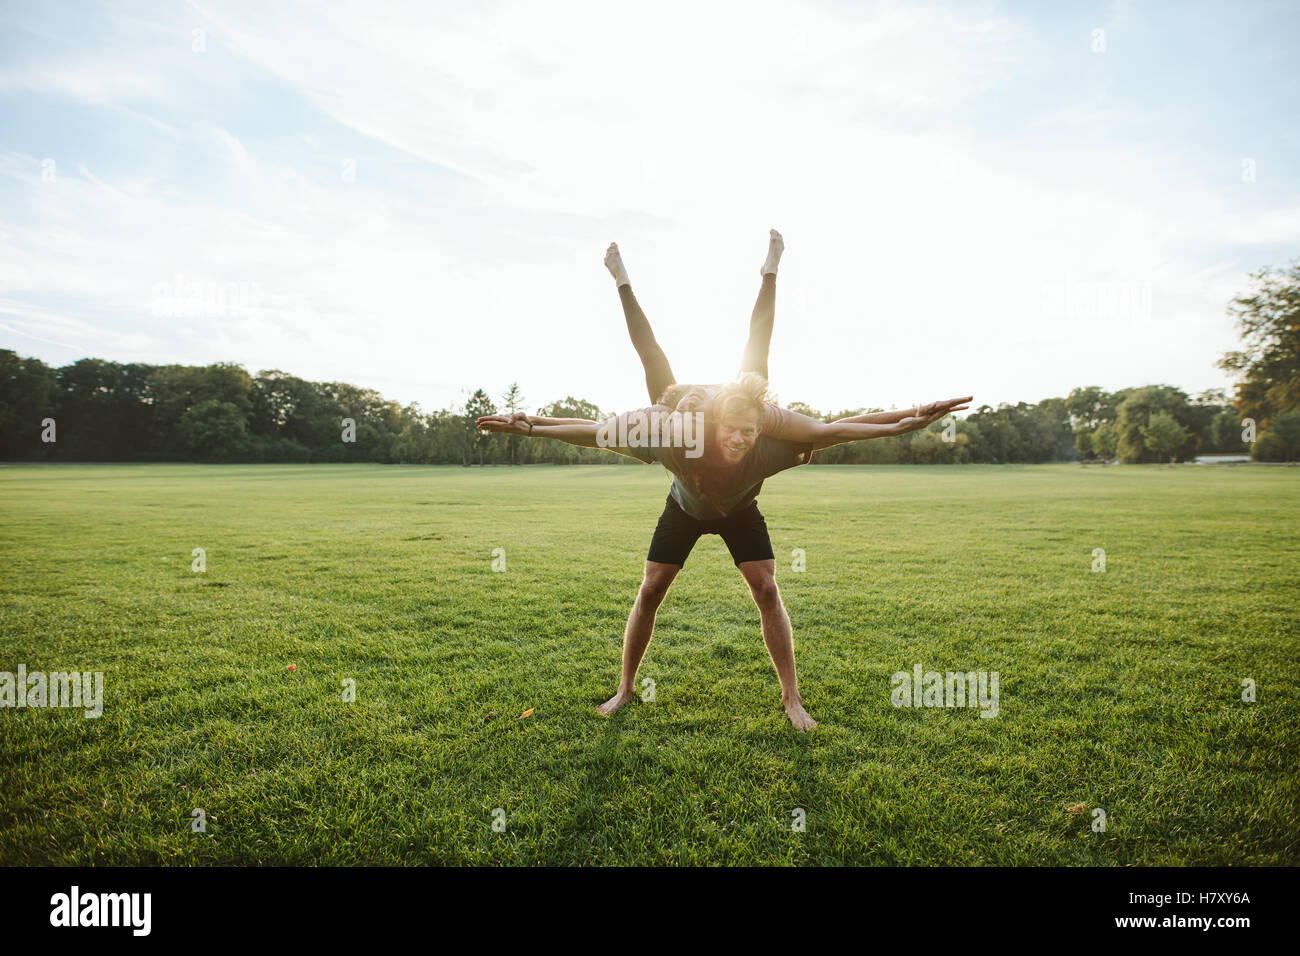 Healthy young couple doing acrobatic yoga workout in park. Man carrying and balancing woman on his back with their hands outstre Stock Photo